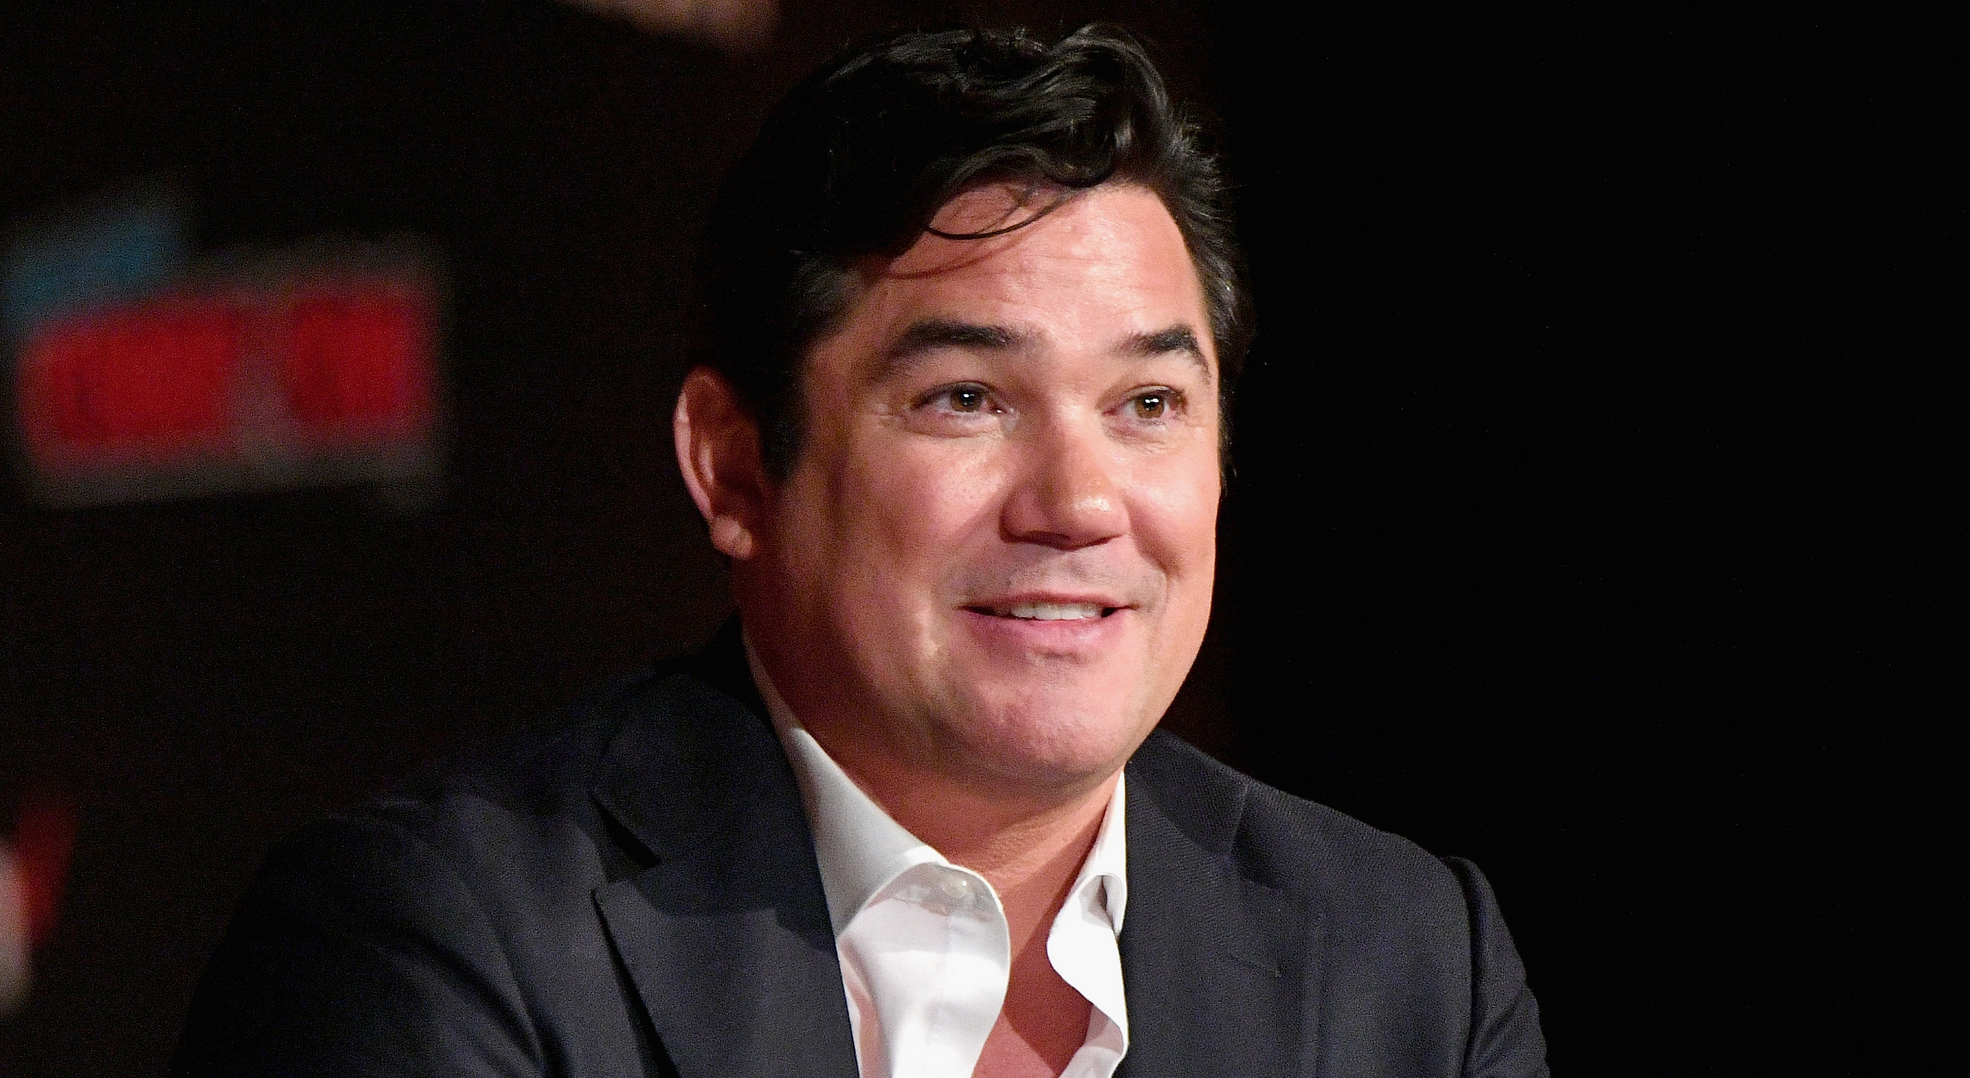 Man of Steel: Dean Cain is Casting For Upcoming Film and Starring in Faith-Based Film About Free Speech